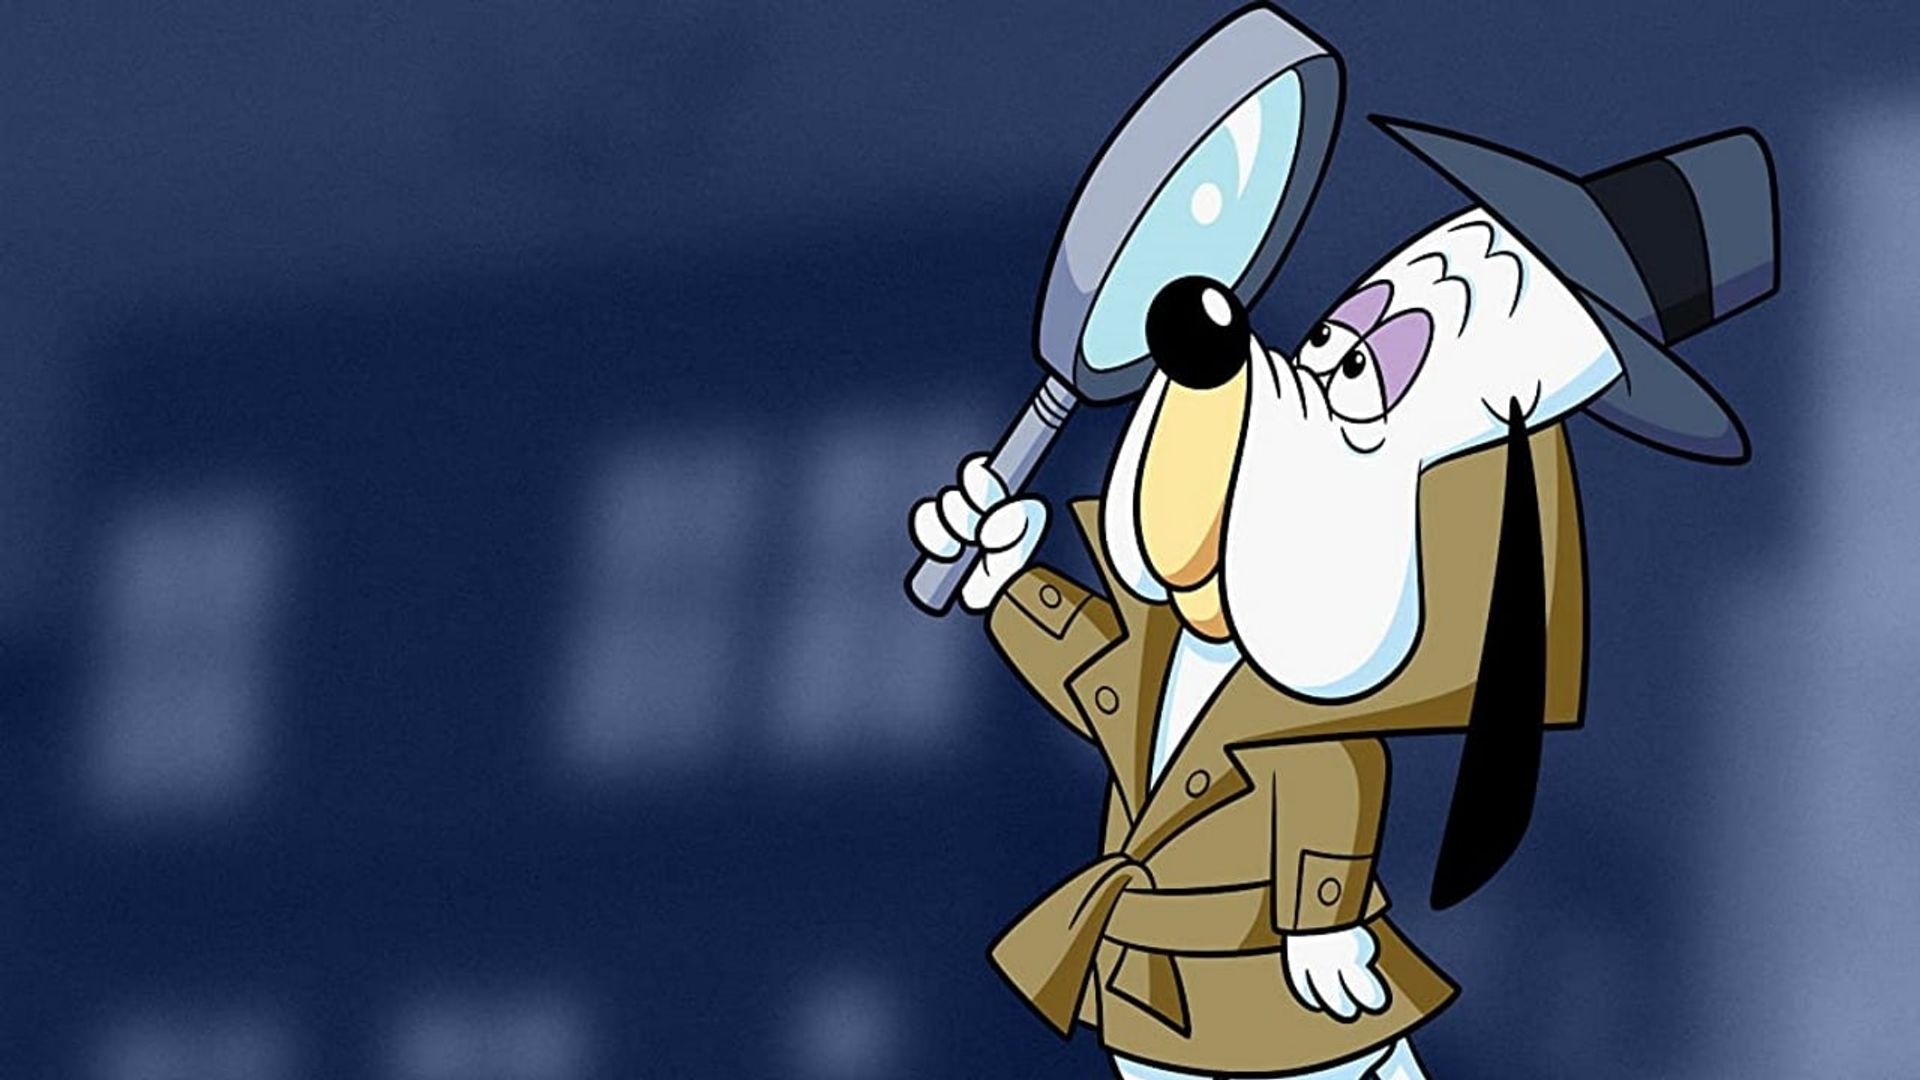 Droopy: Master Detective background